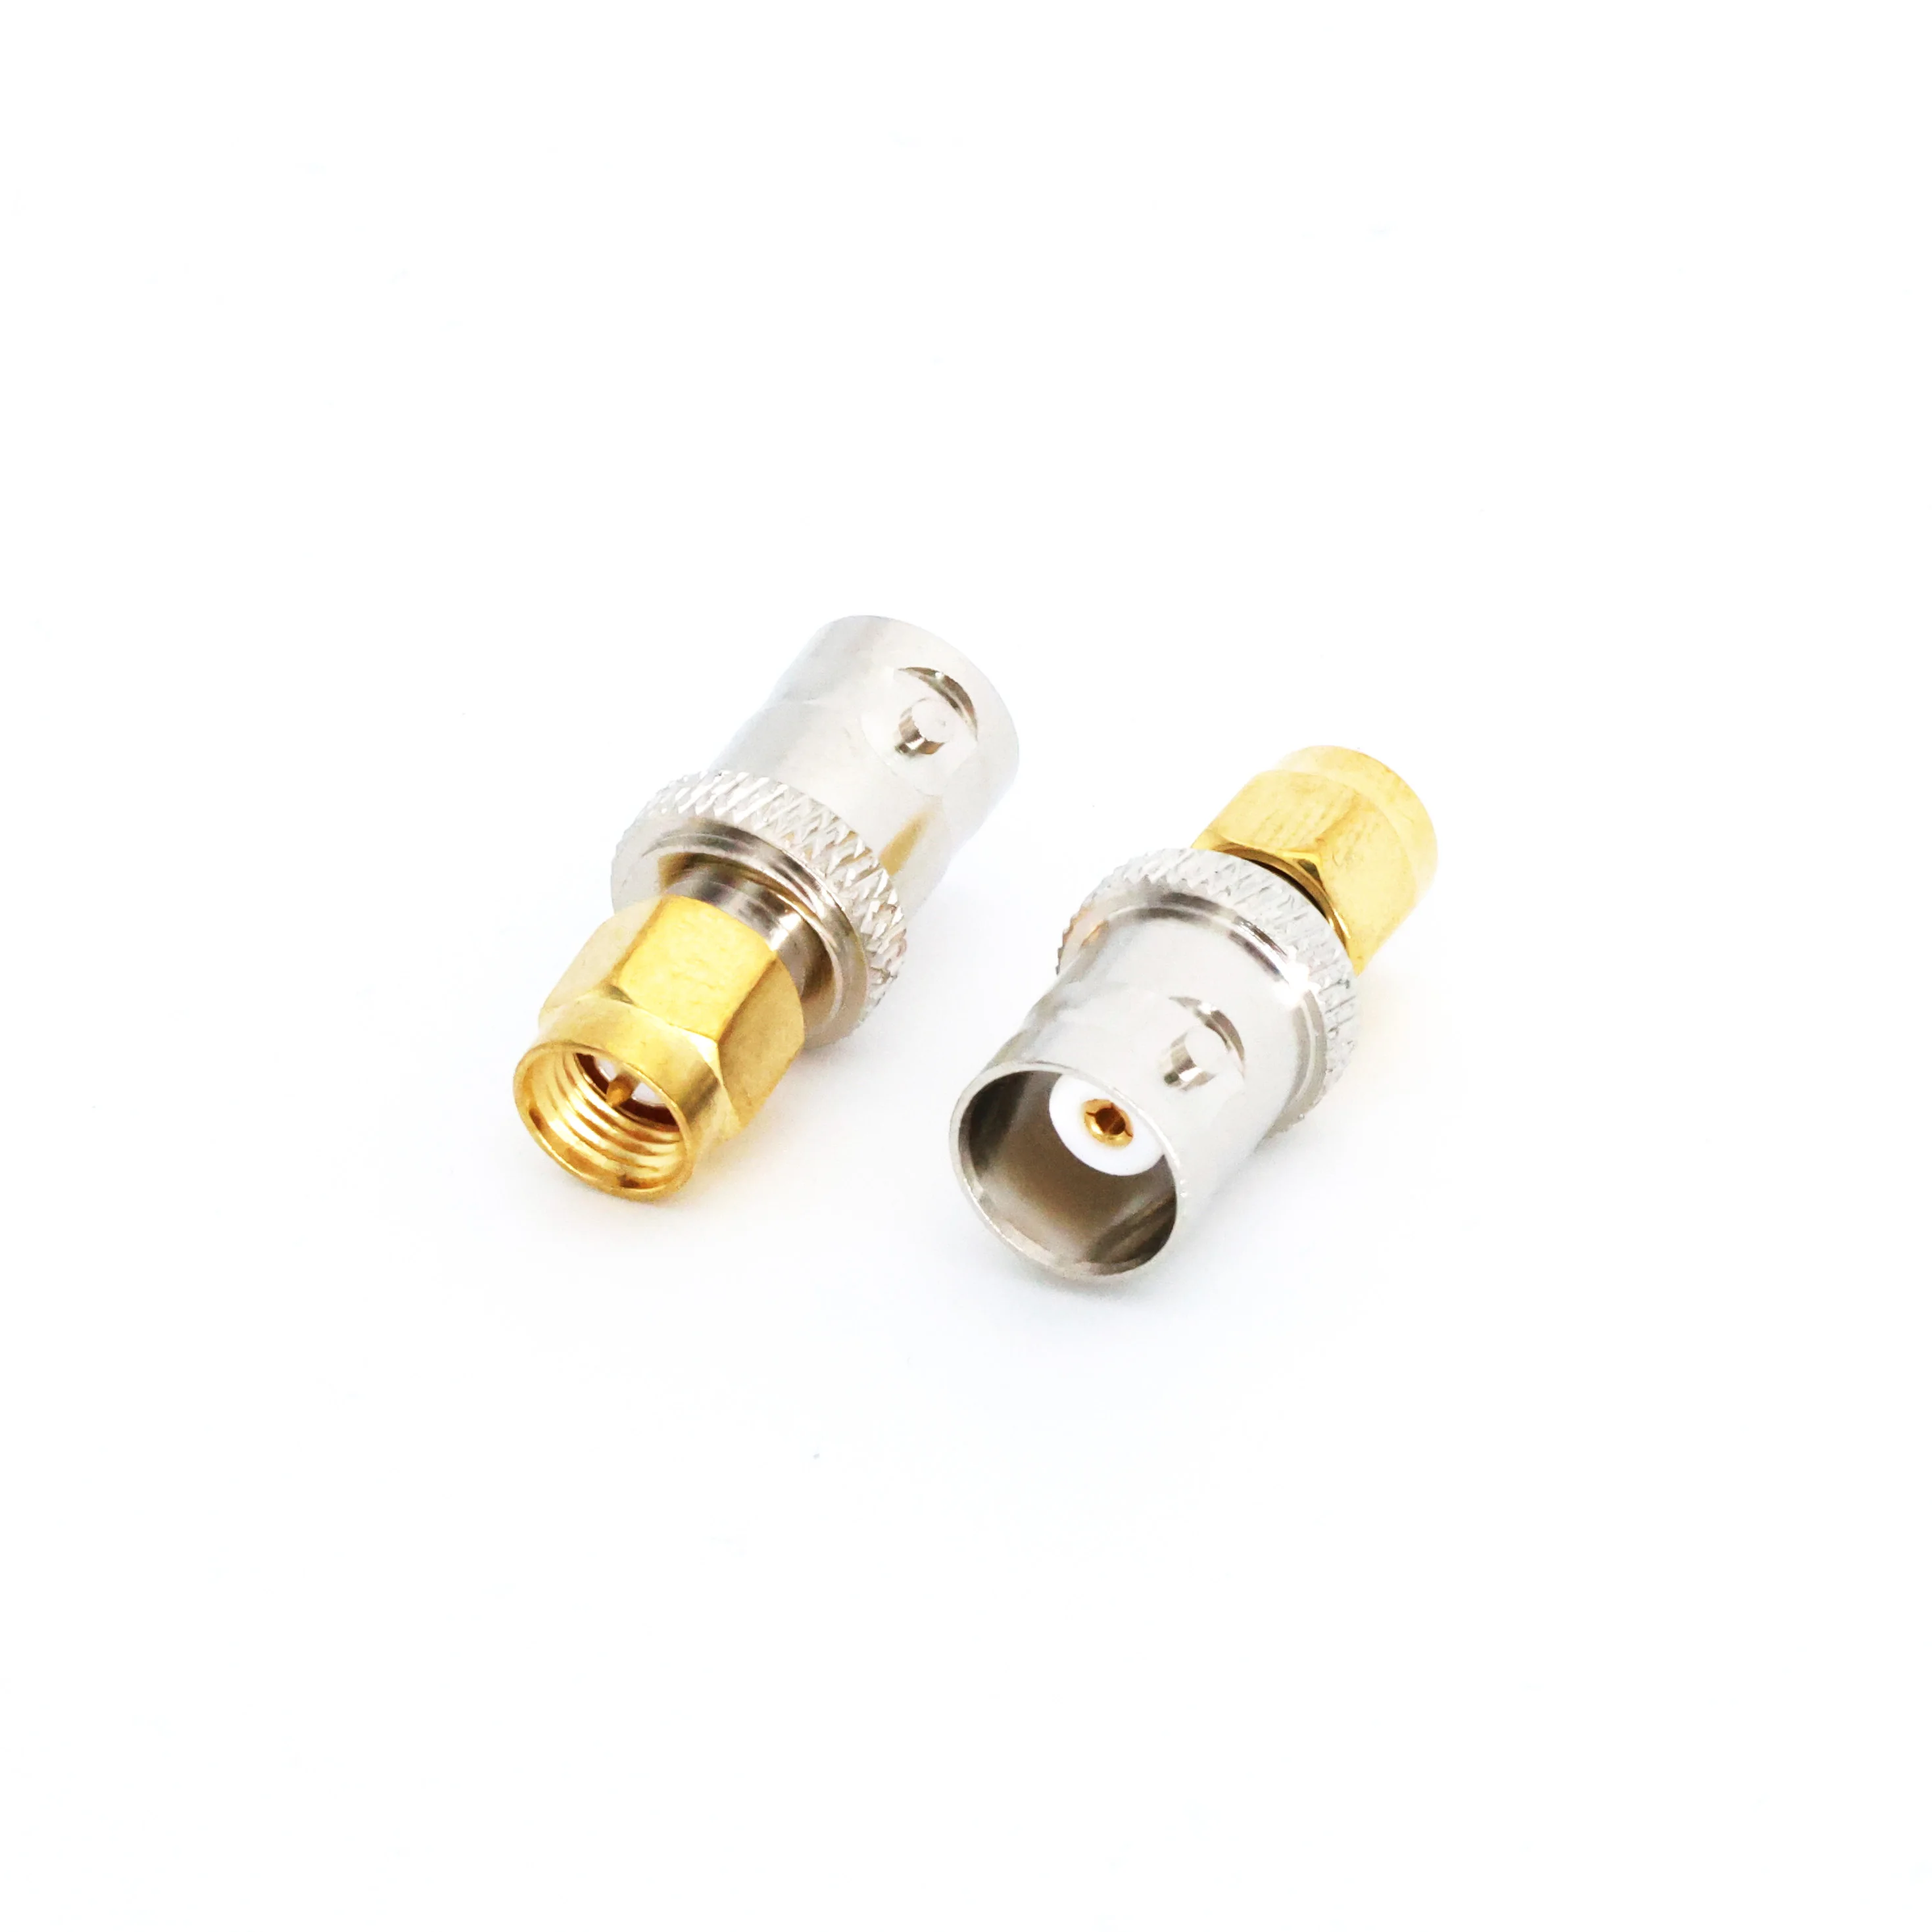 2pcs Coaxial connector SMA to BNC SMA (inner screw inner needle) to BNC female SMA-J/BNC-K adapter 2pcs eizz 24k gold plated pure red copper y fork speaker spade plugsez 504 connector terminal screw fix hifi audio cd tv amp